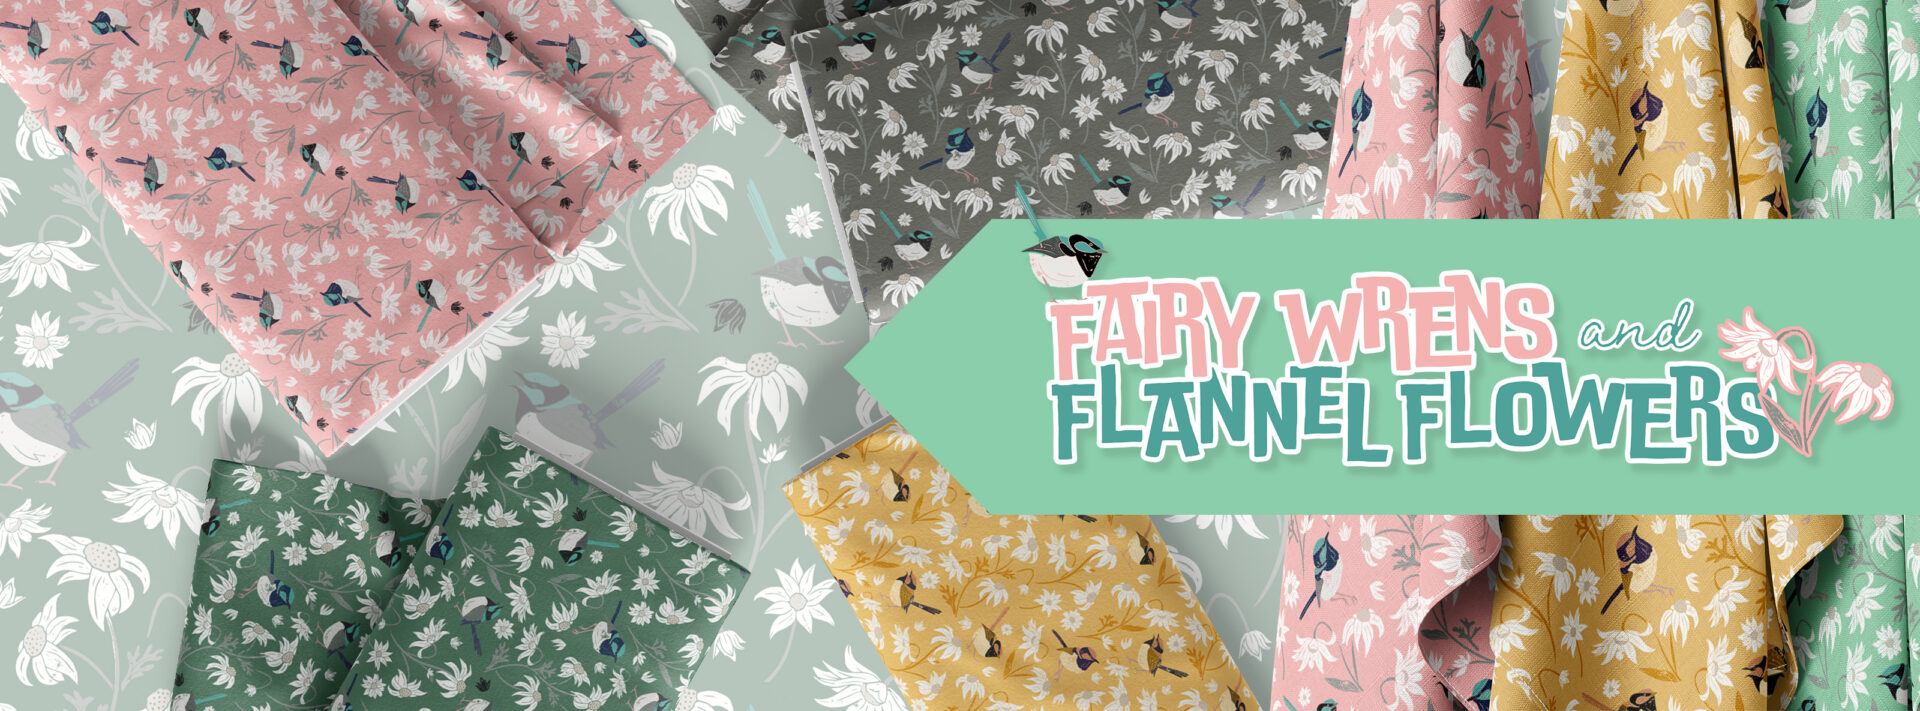 Fairy Wrens and Flannel Flowers Large Website Banner